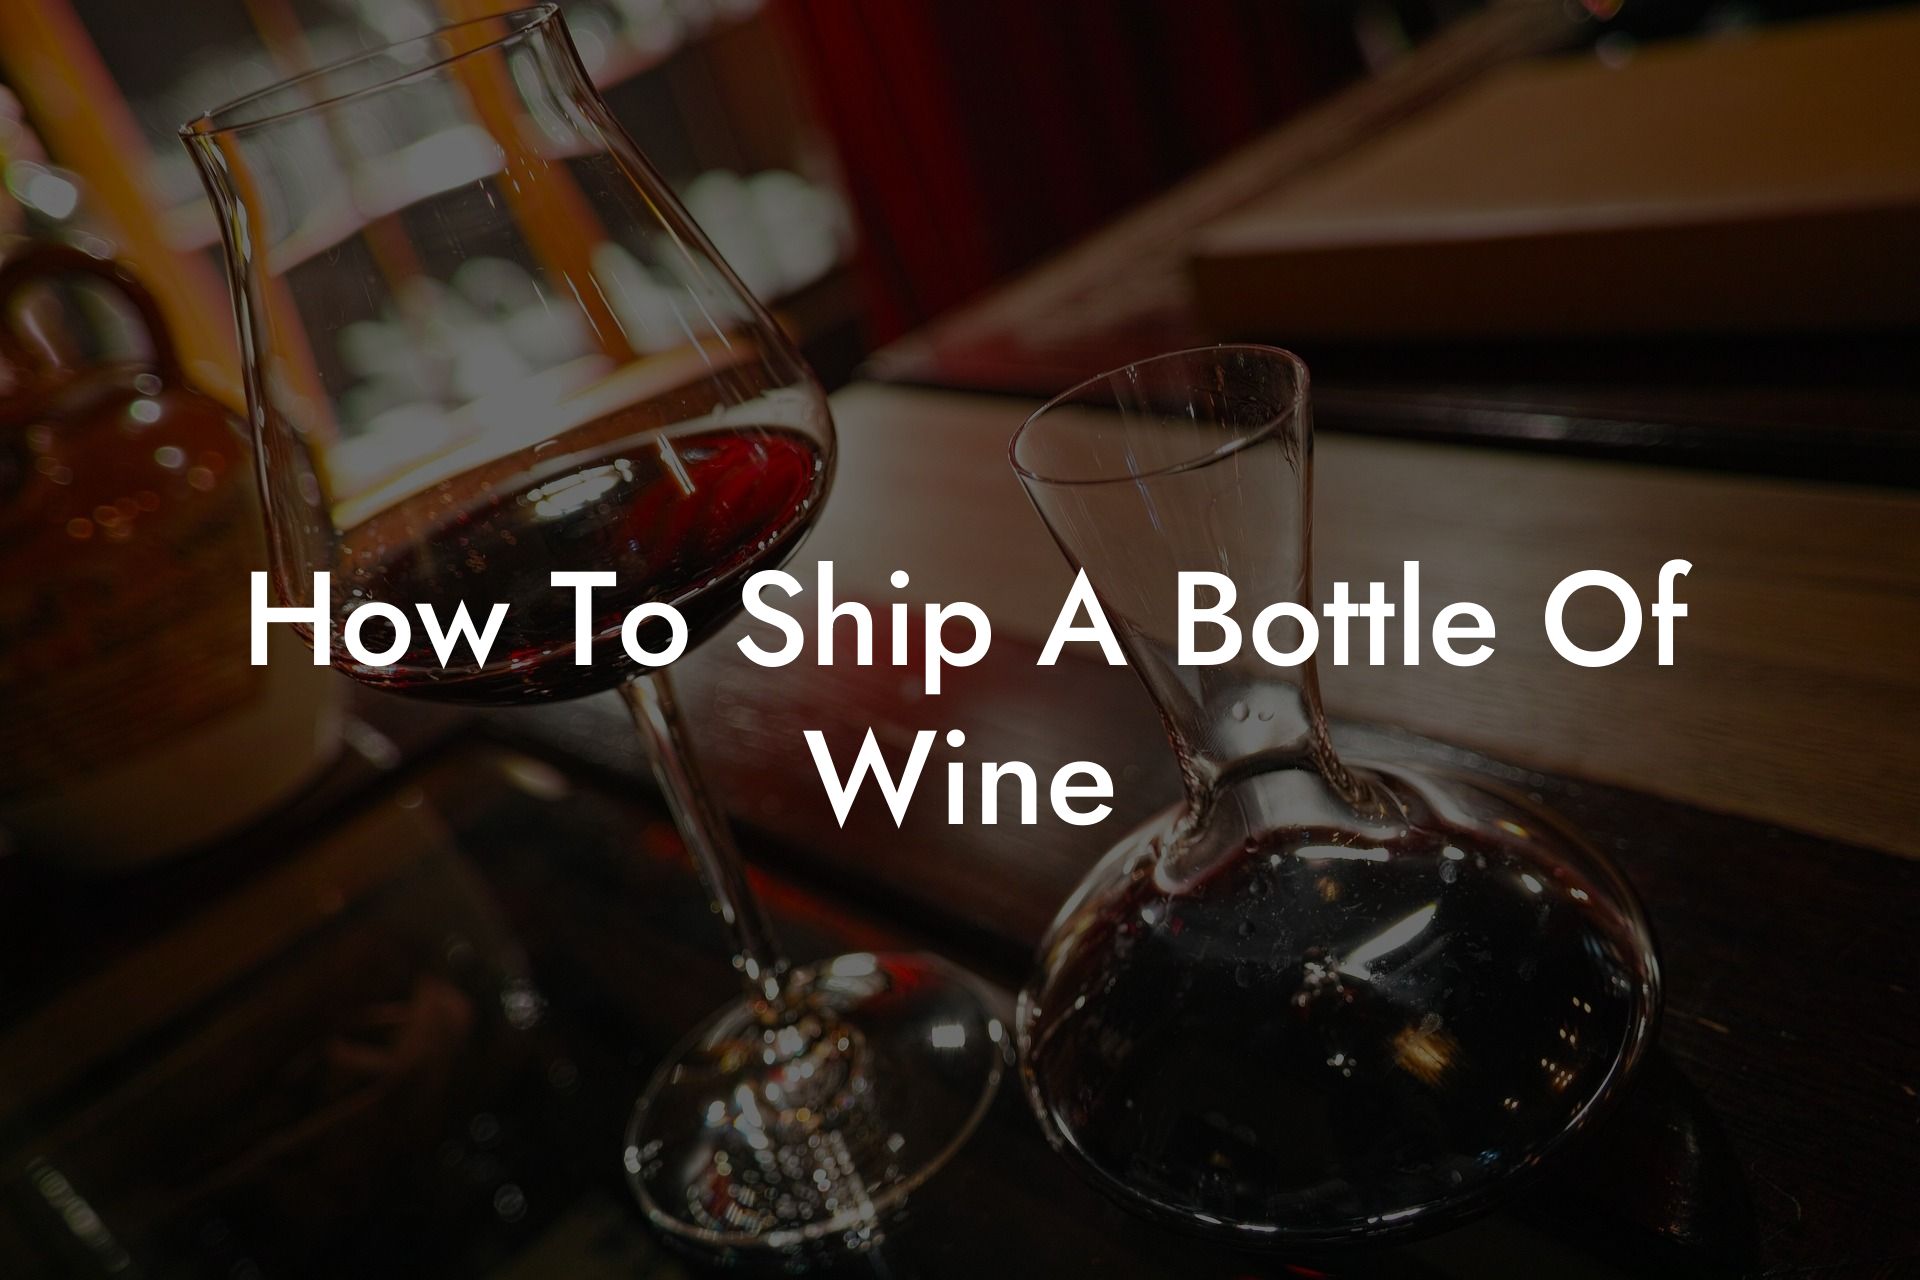 How To Ship A Bottle Of Wine